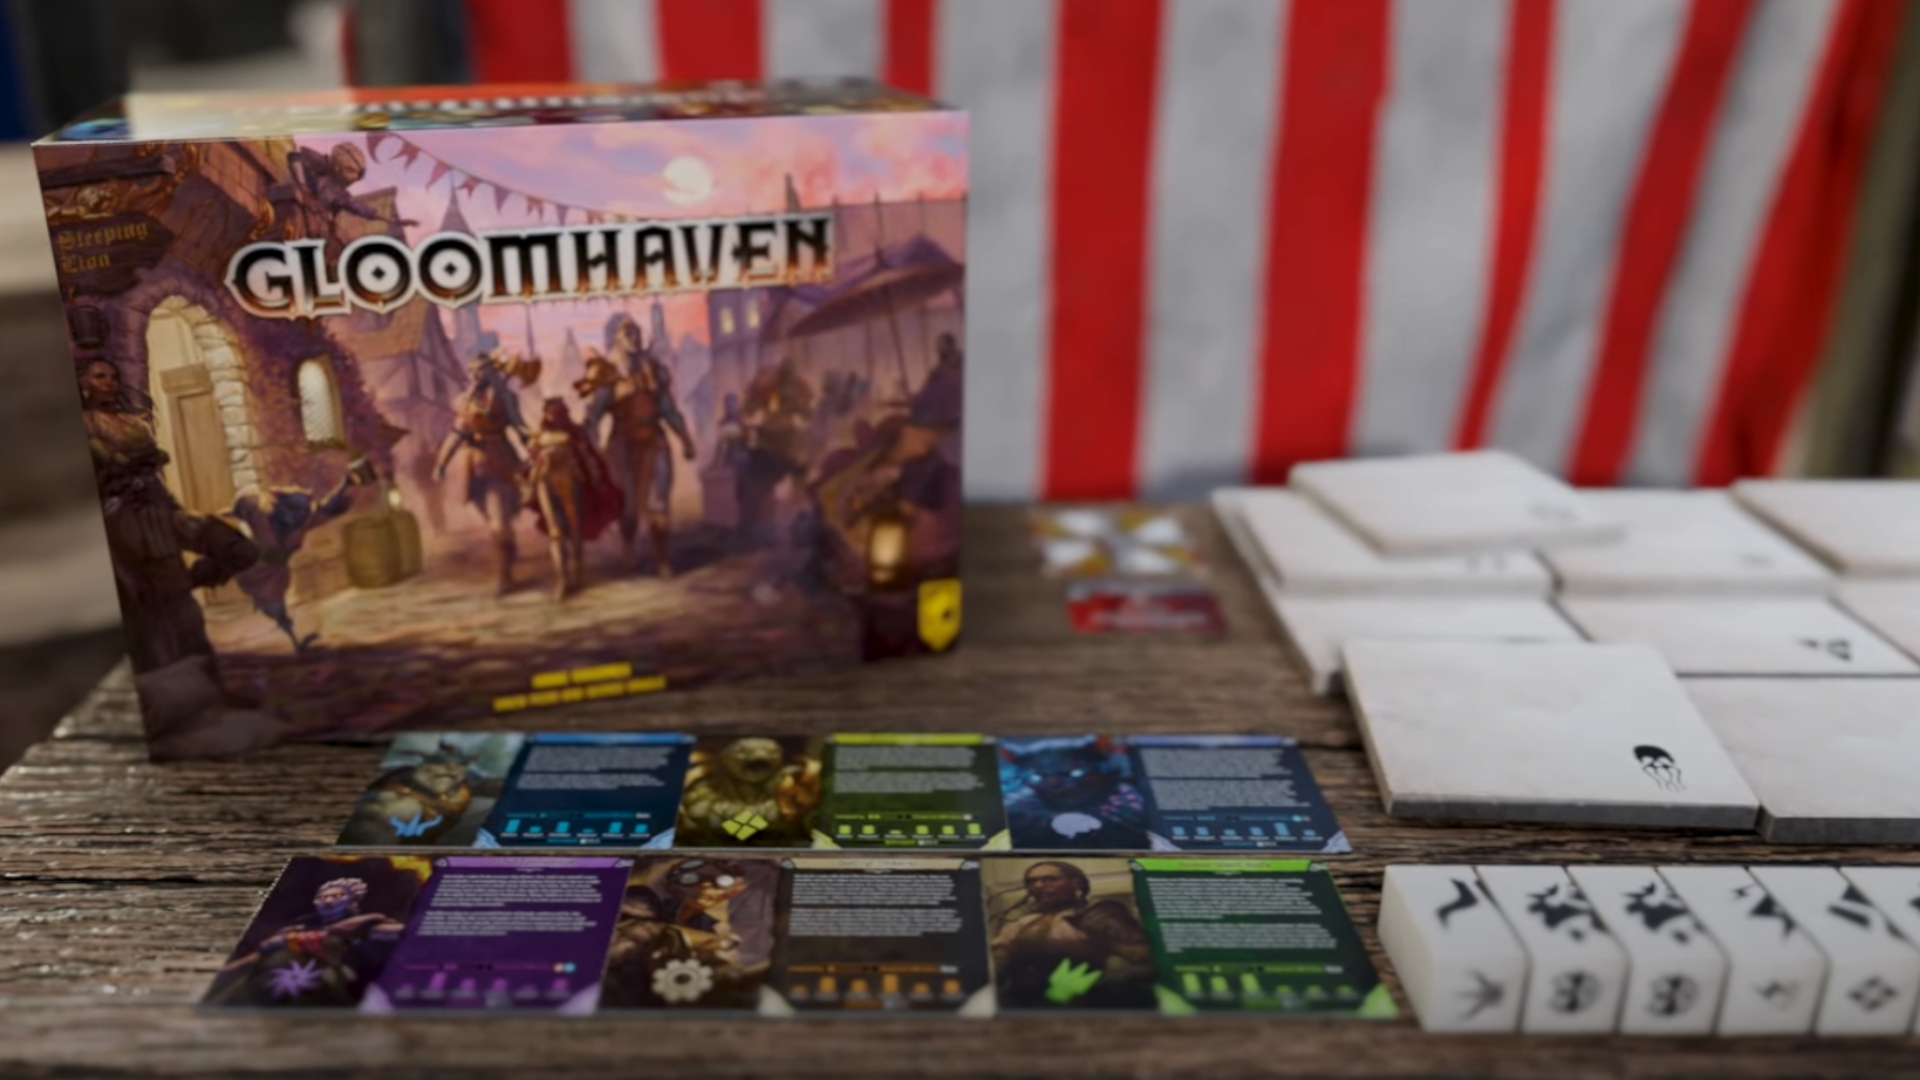 Announcing Gloomhaven: The Role Playing Game - Cephalofair